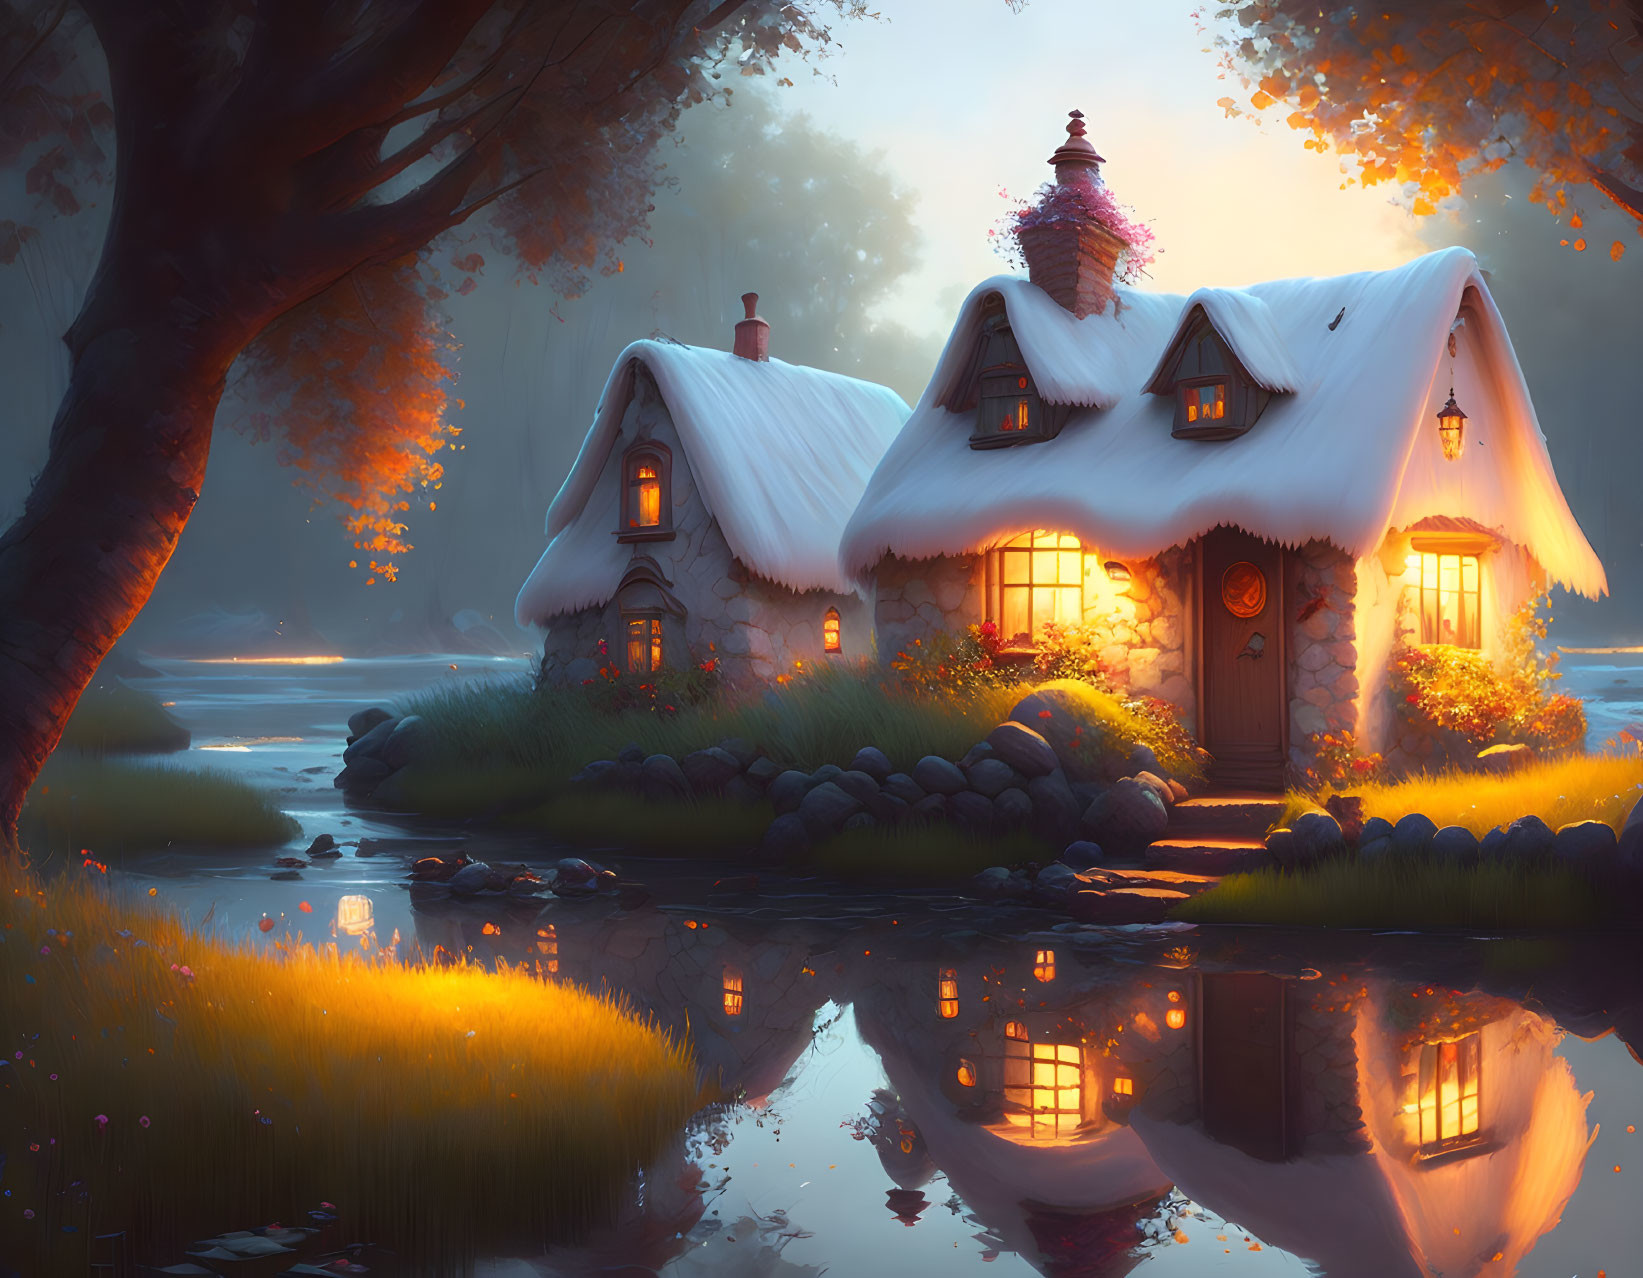 whimsical cottage